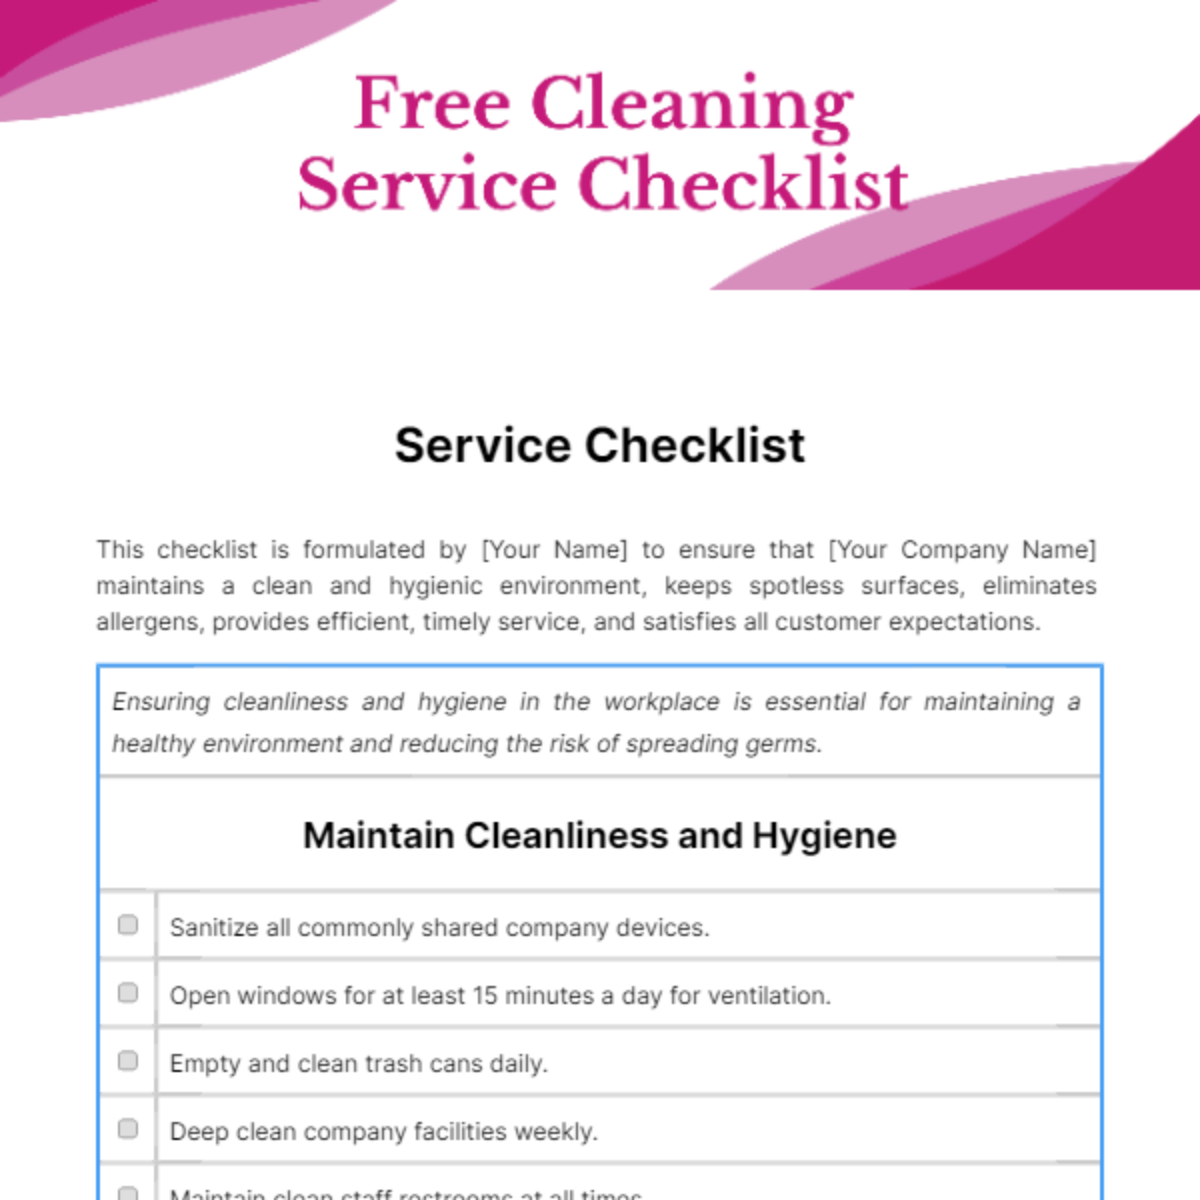 Free Cleaning Service Checklist Template